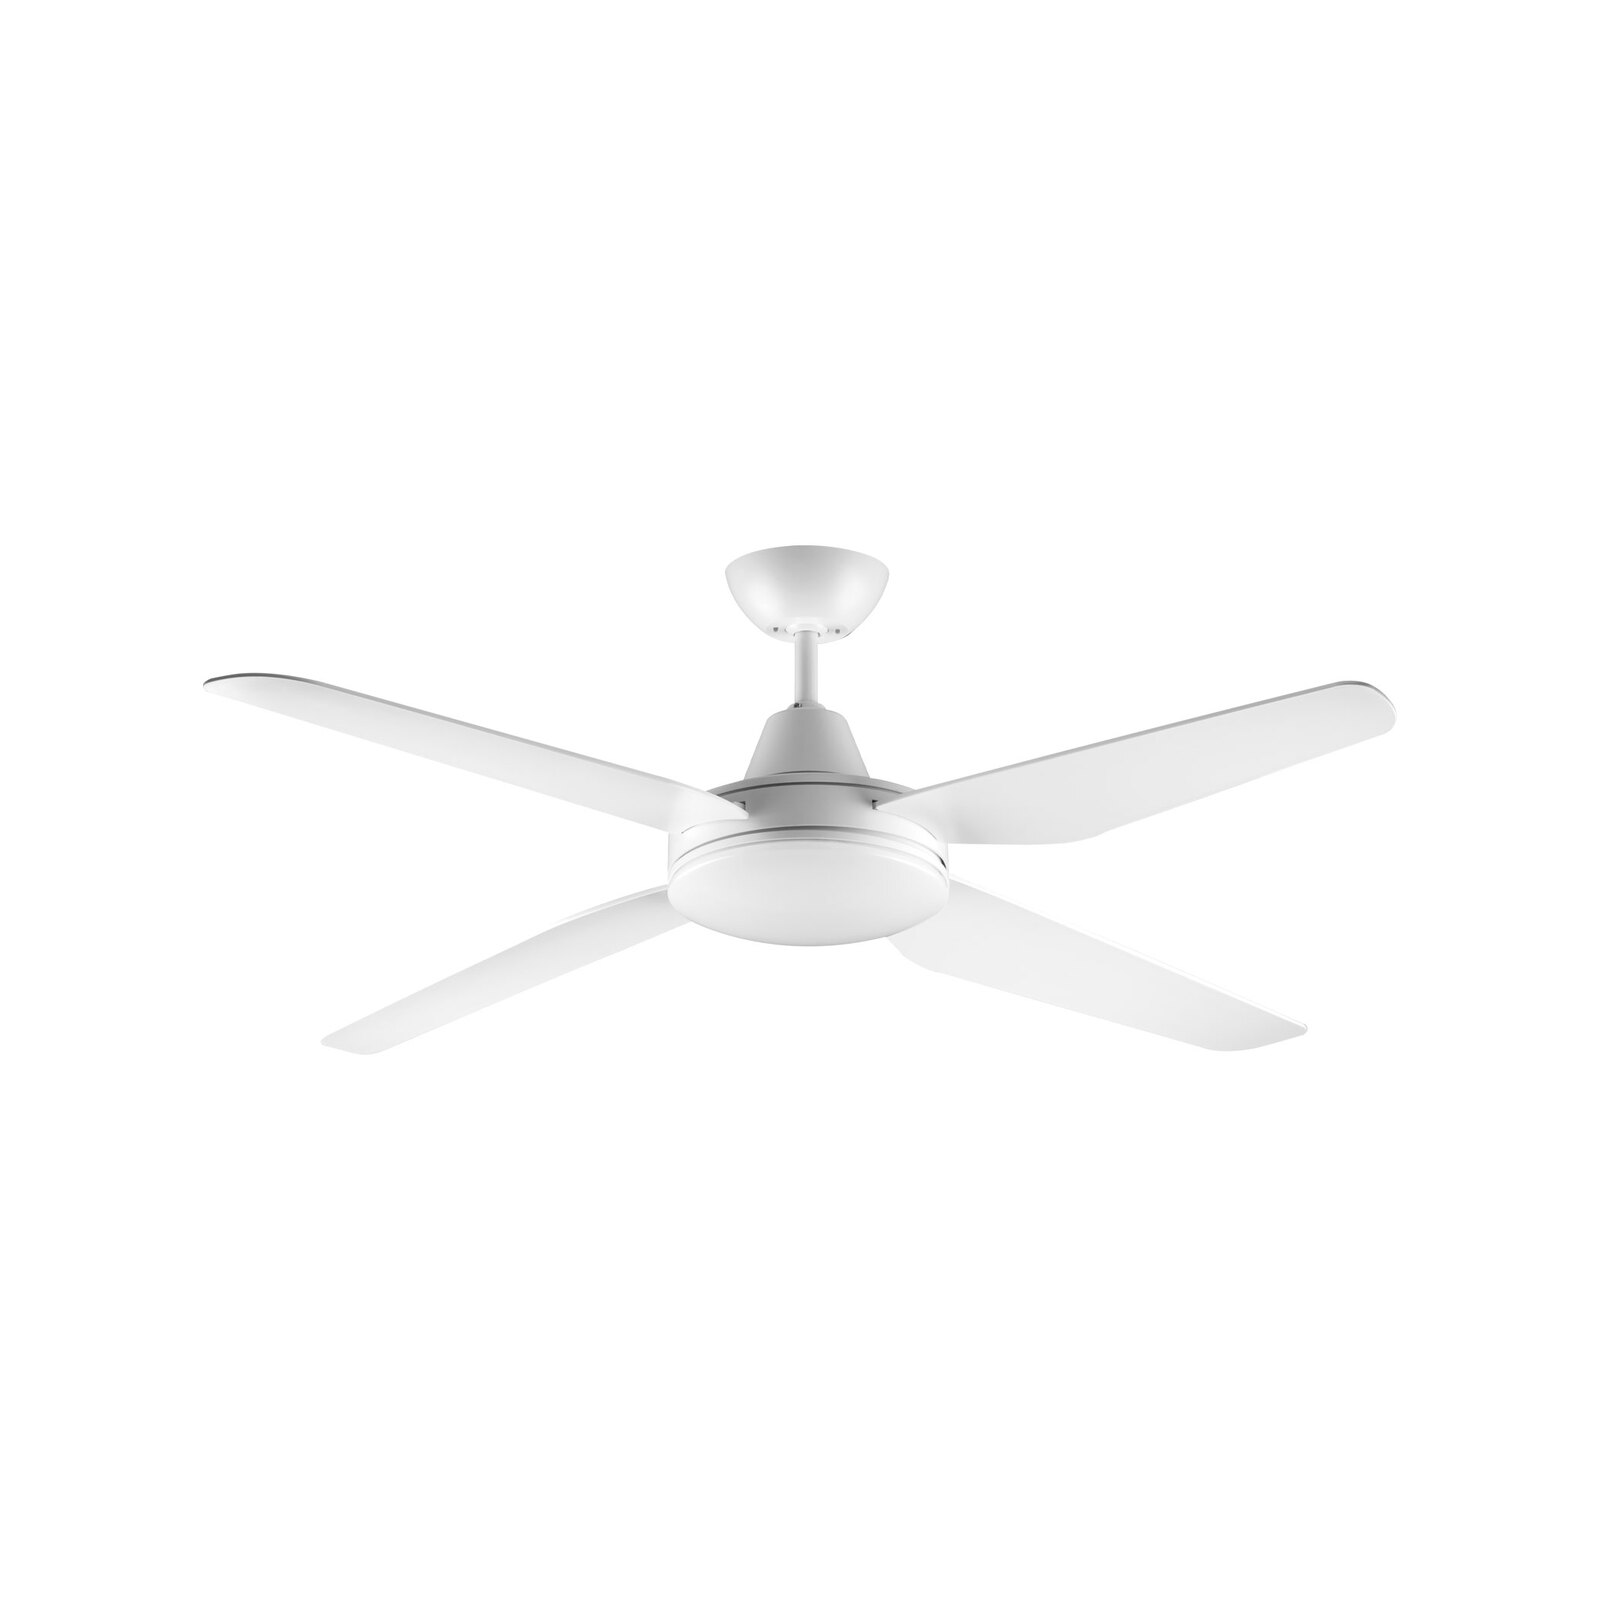 ceiling fan and light stopped working